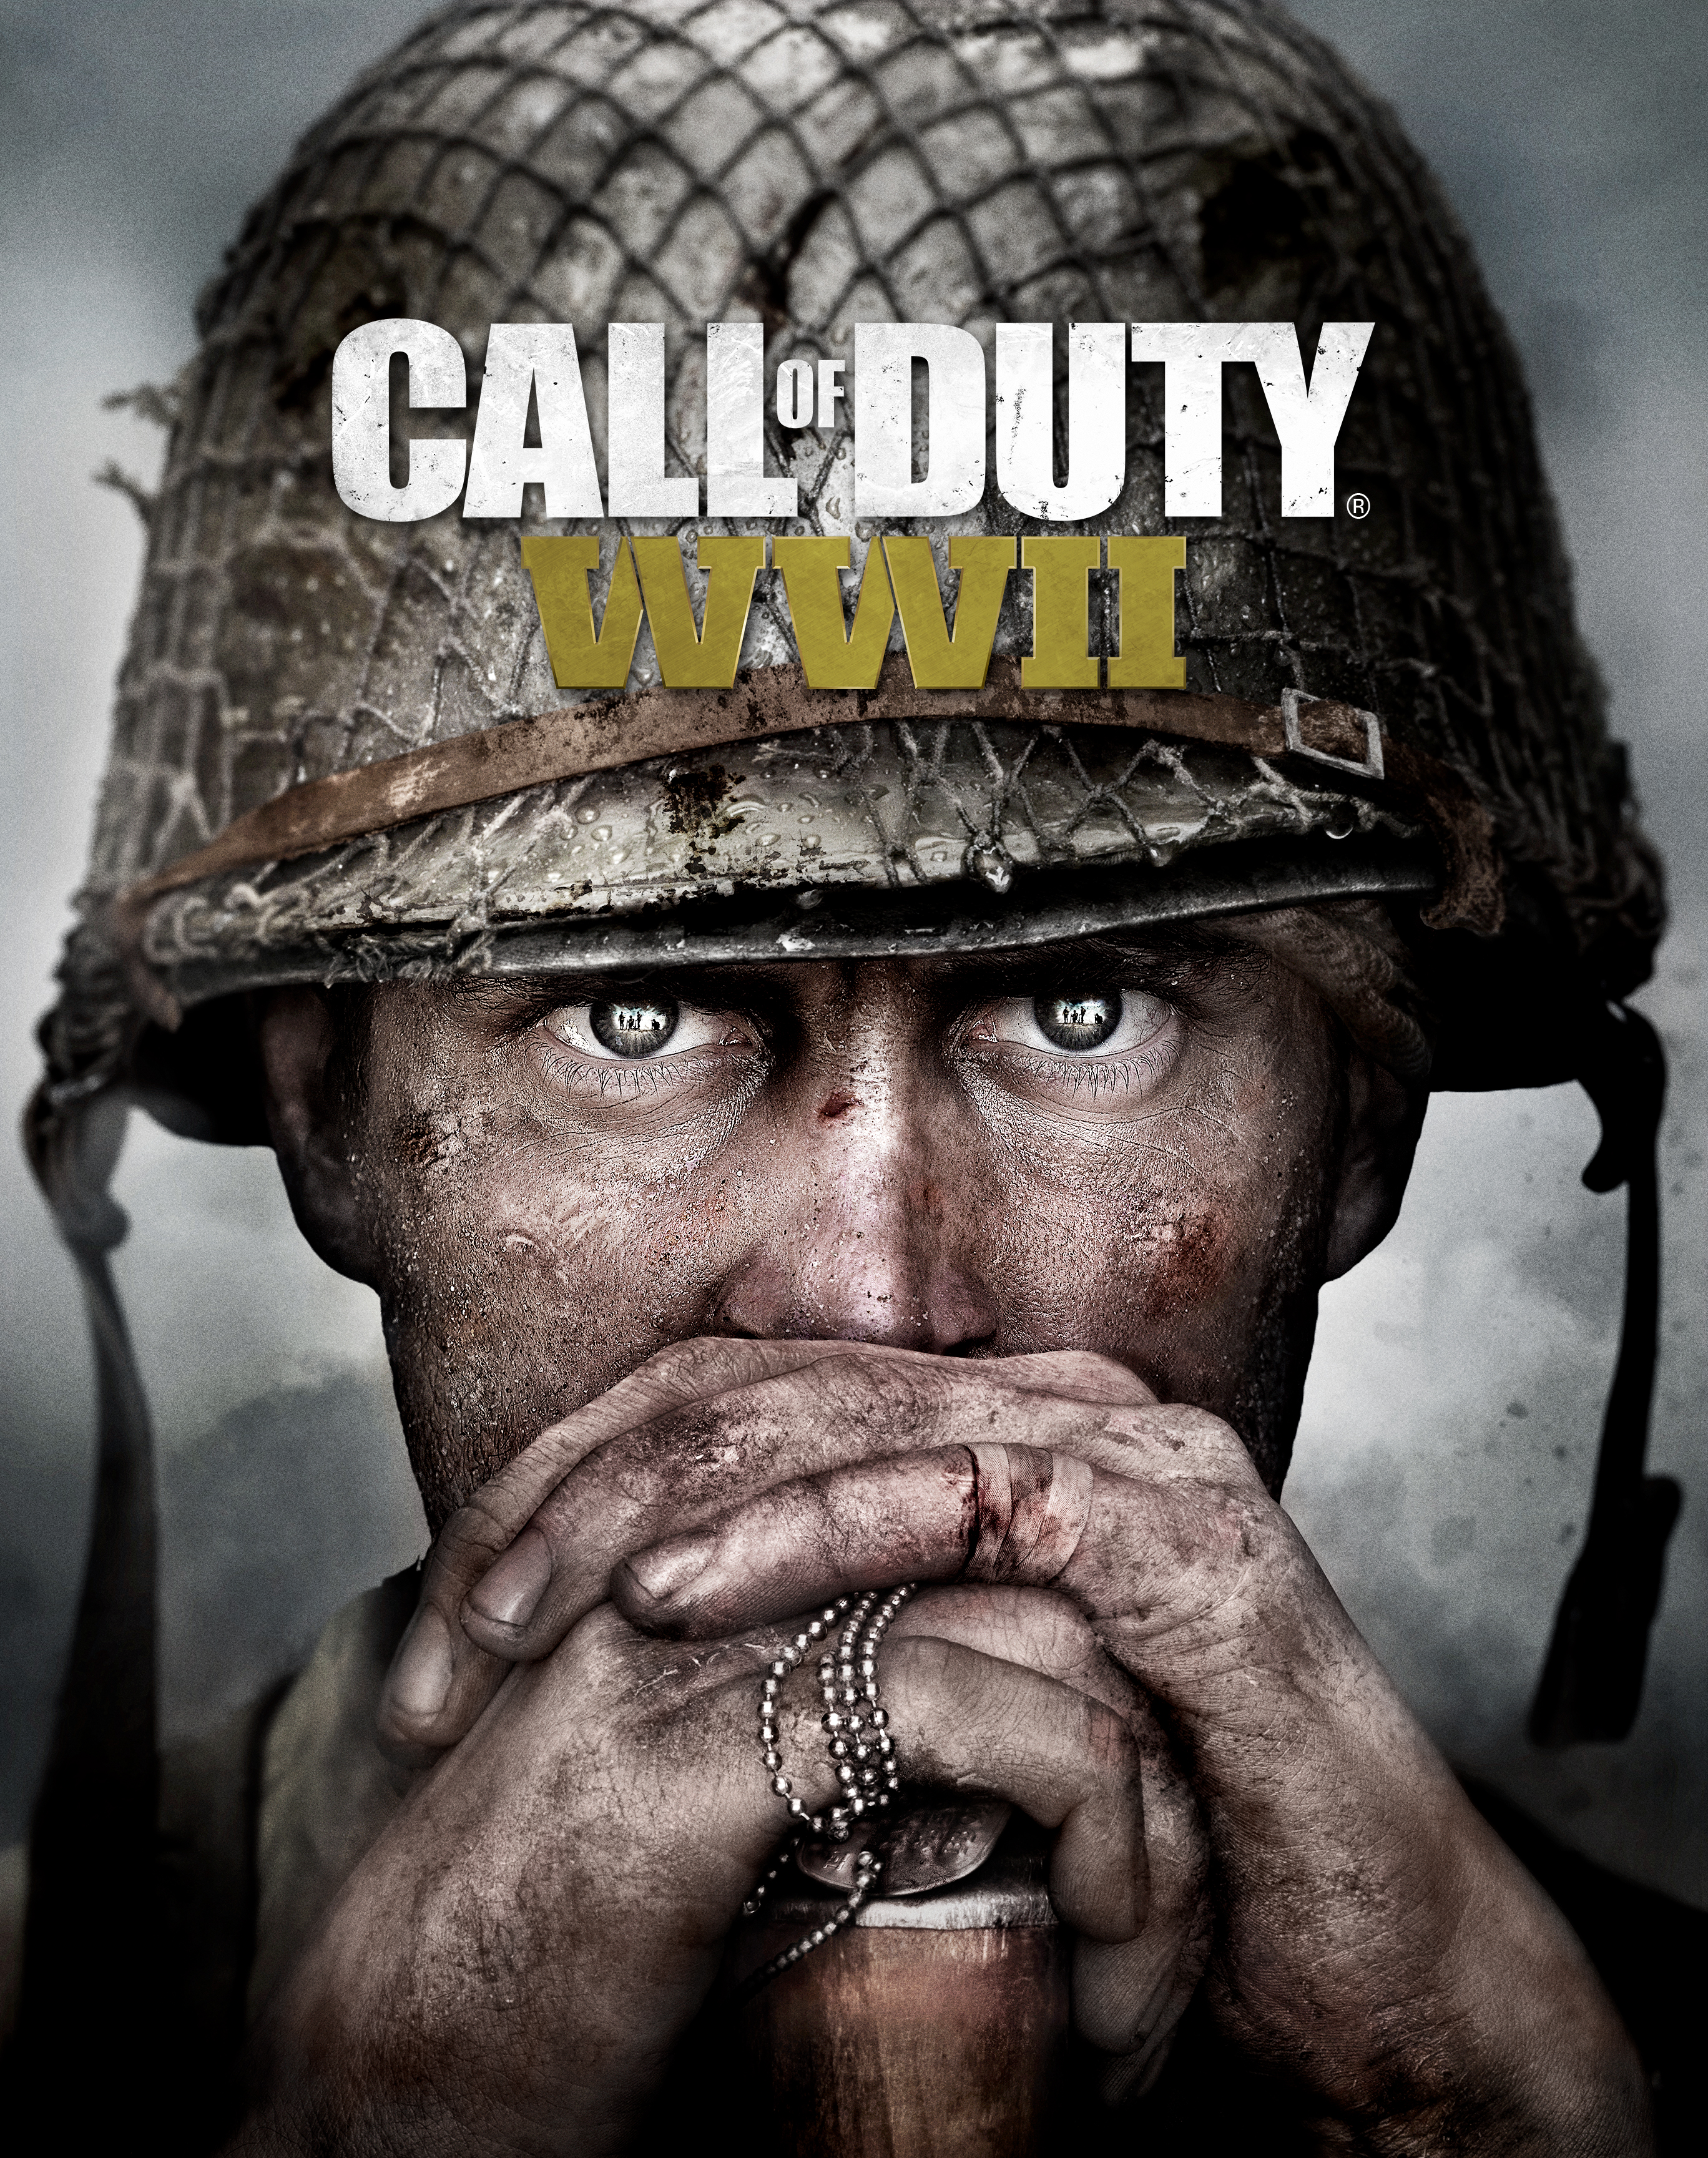 Earn up to 500 Call of Duty Points for free in Call of Duty: WWII